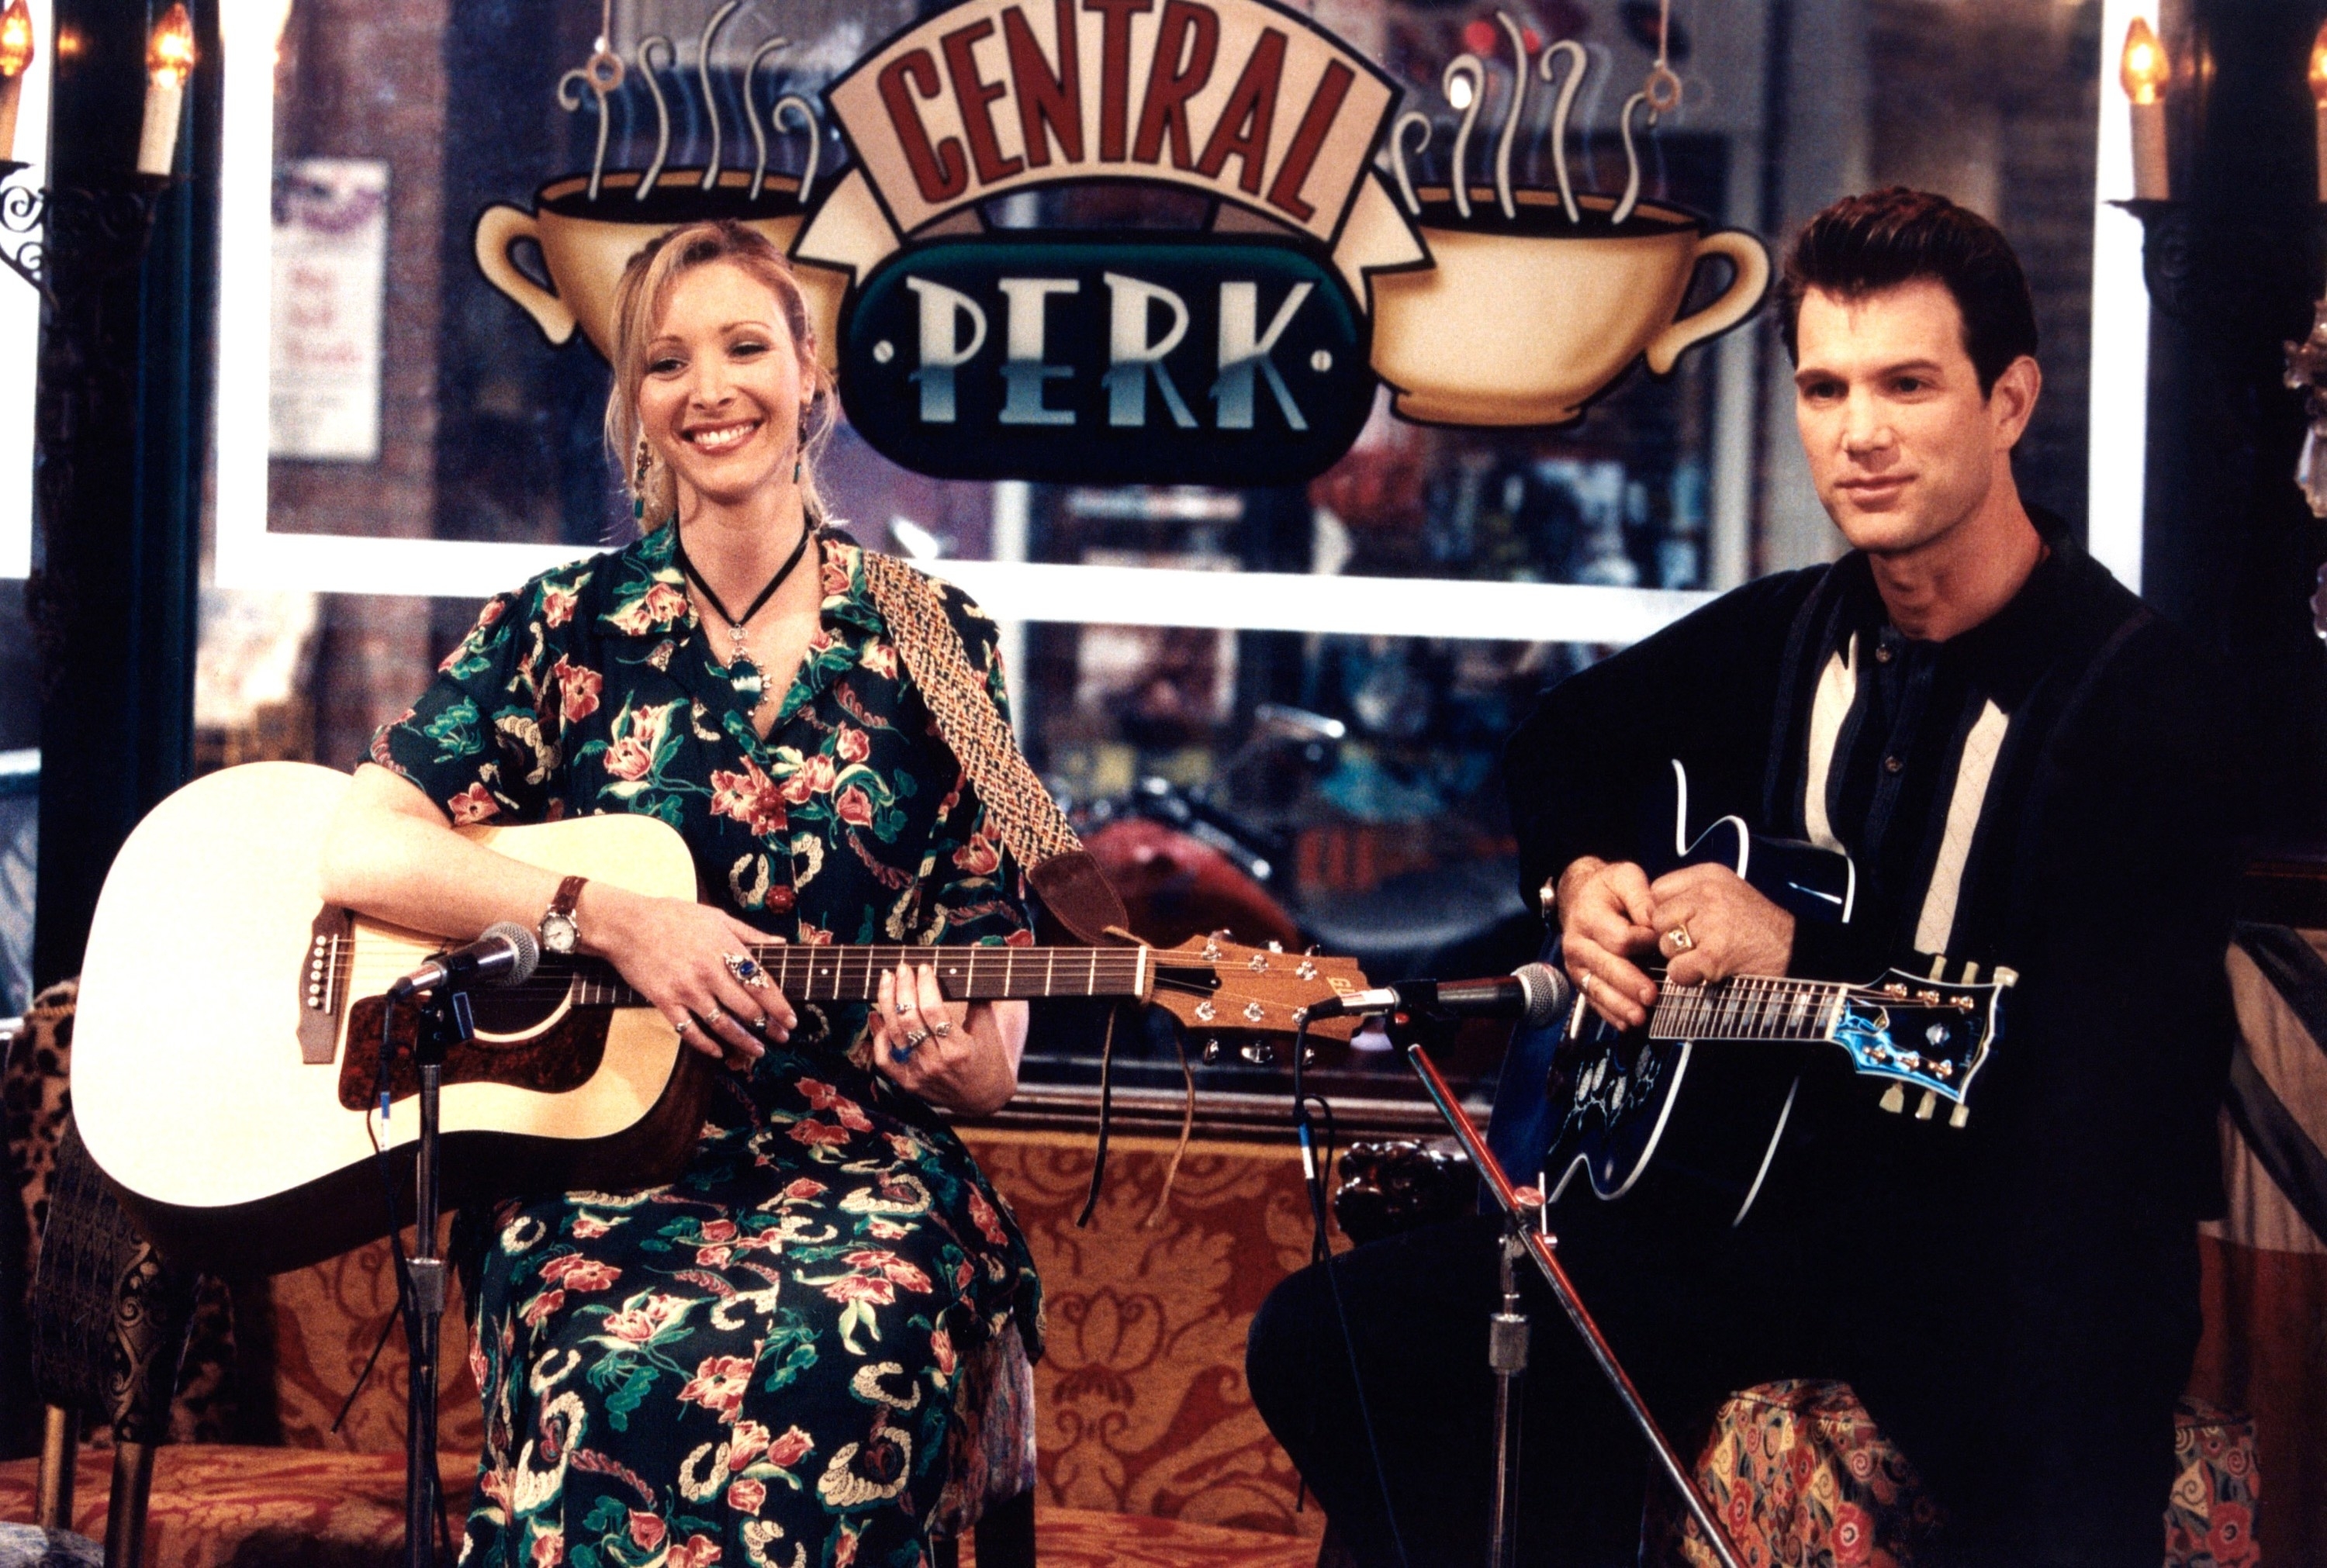 Phoebe and guest playing guitars in Central Perk from &quot;Friends.&quot; Phoebe wears a bohemian style dress